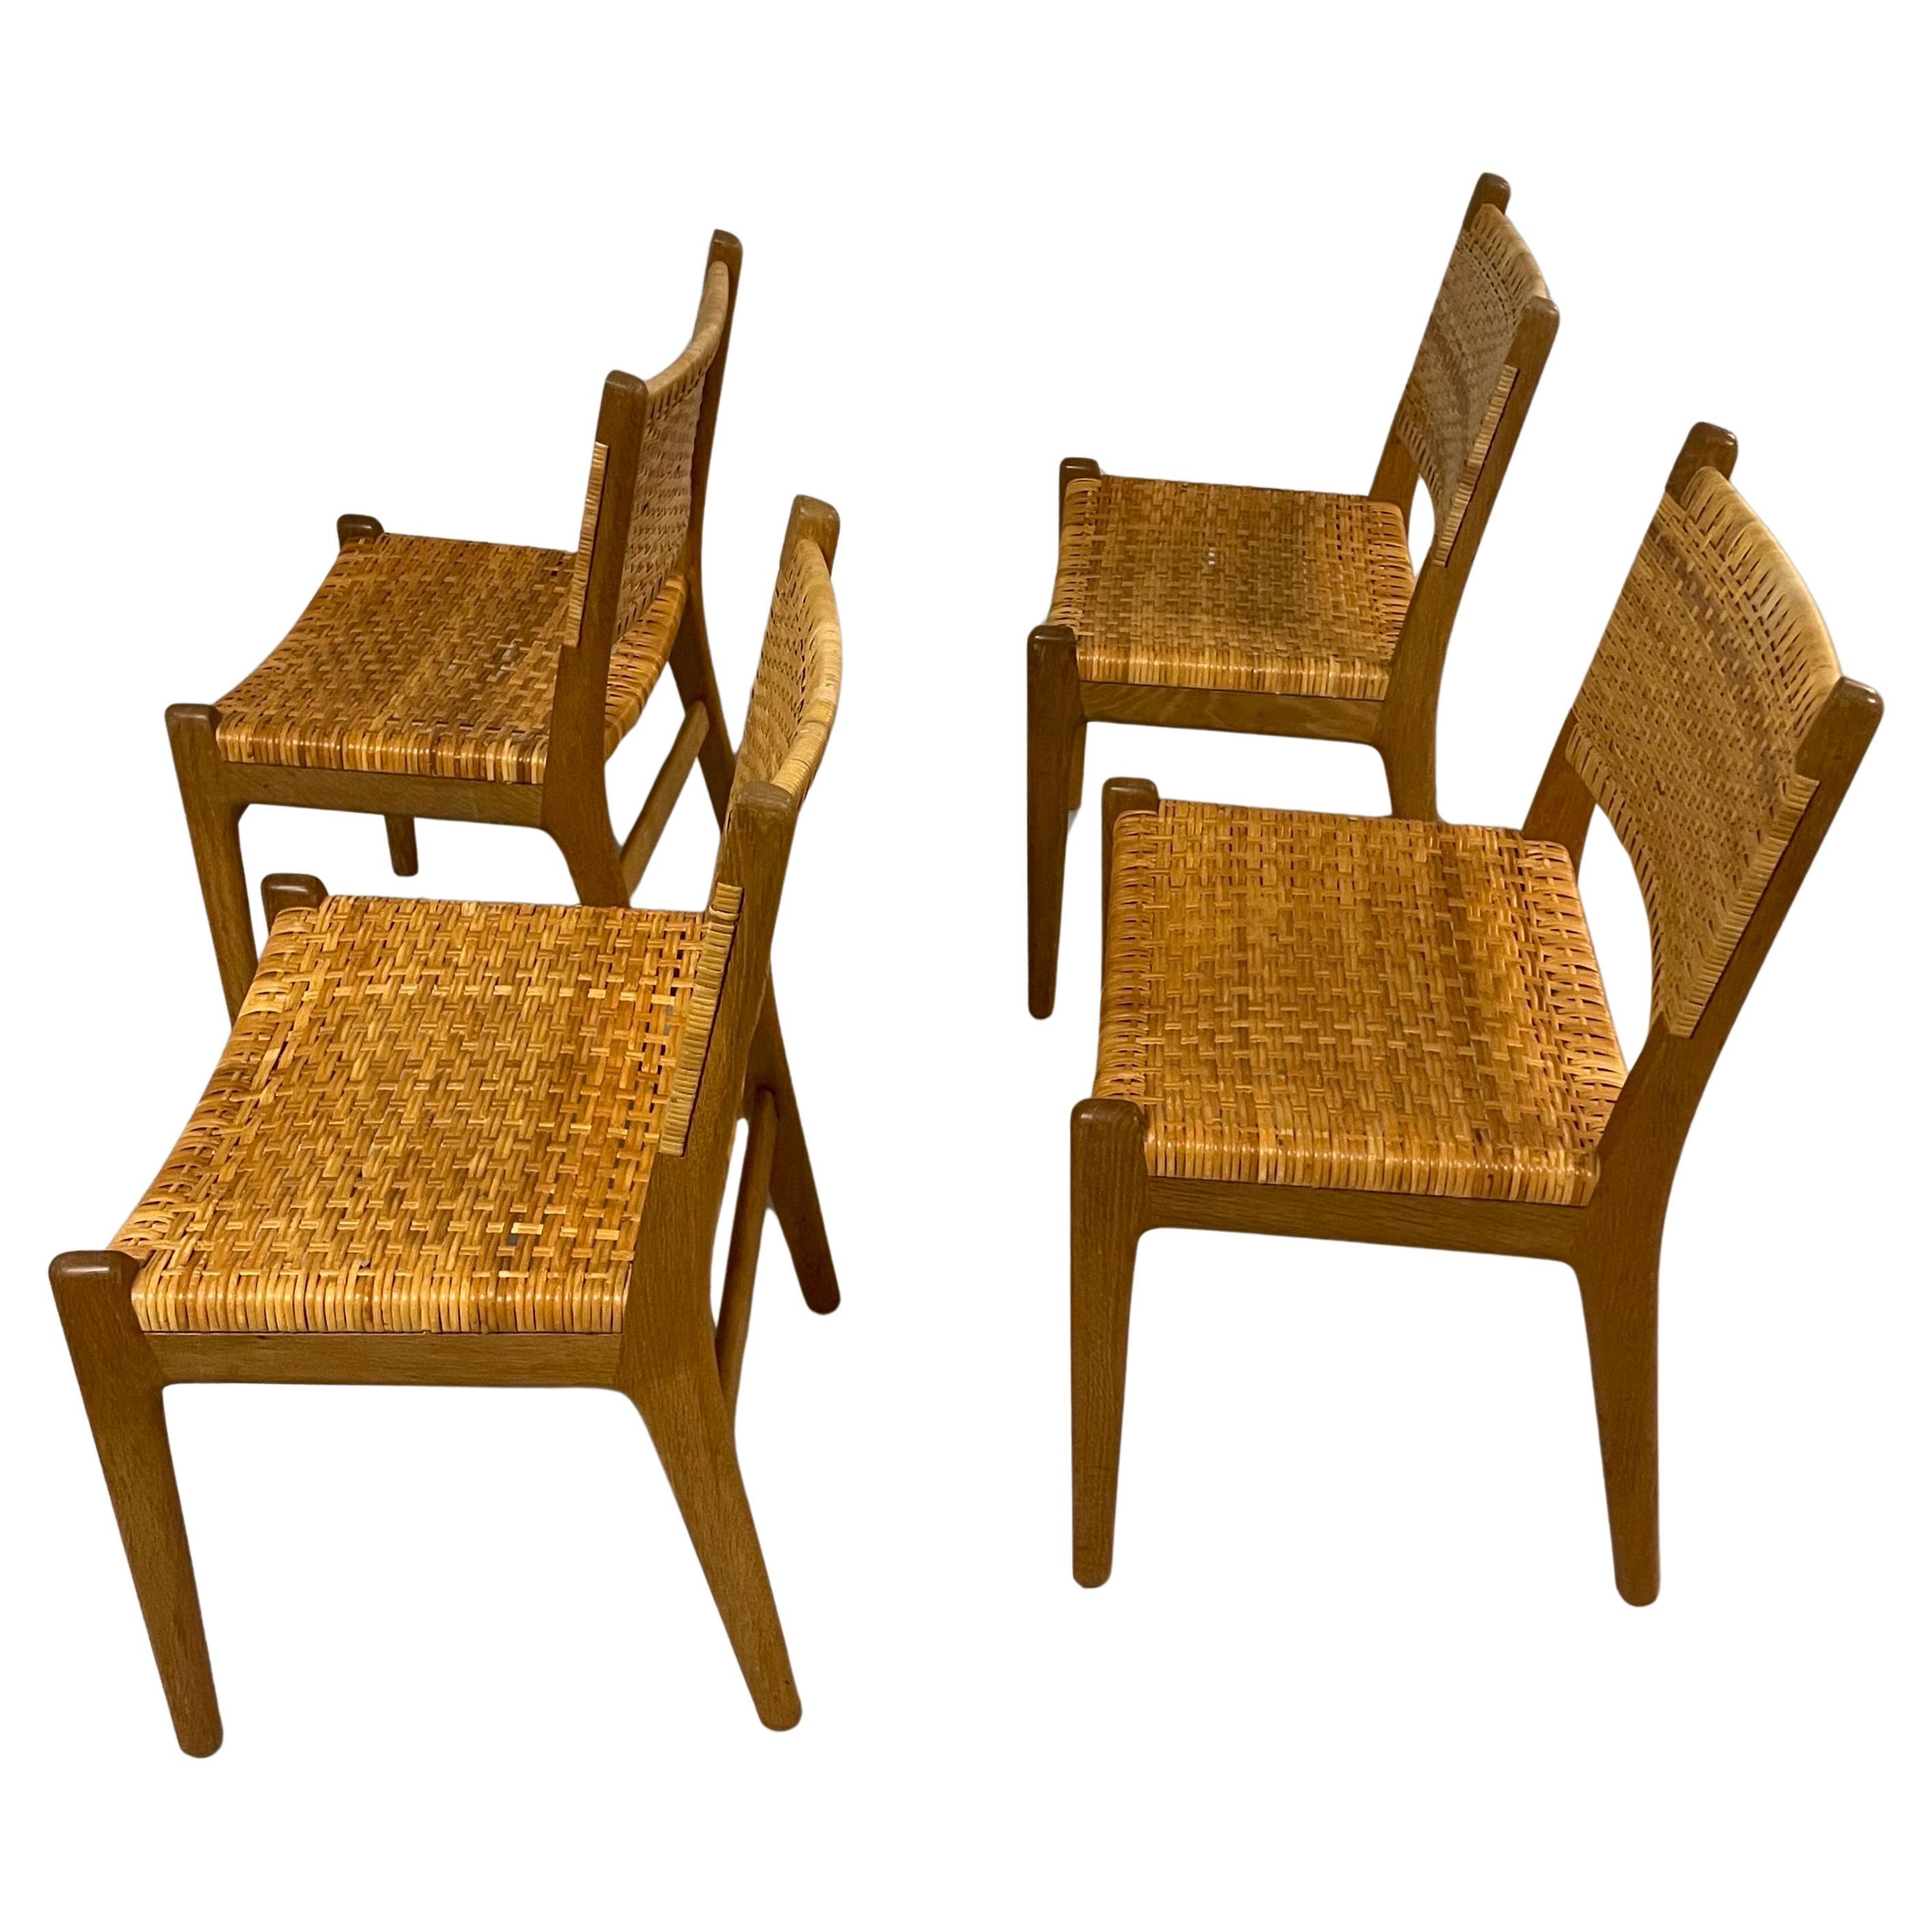 A very rare set of the model CH32 dining chair designed by Hans J. Wegner made for Carl Hansen & Sons in the 1950s. Solid oak with beautiful grain  and rattan cane on the seats and back. This model is no longer being produced and is hardly to find.